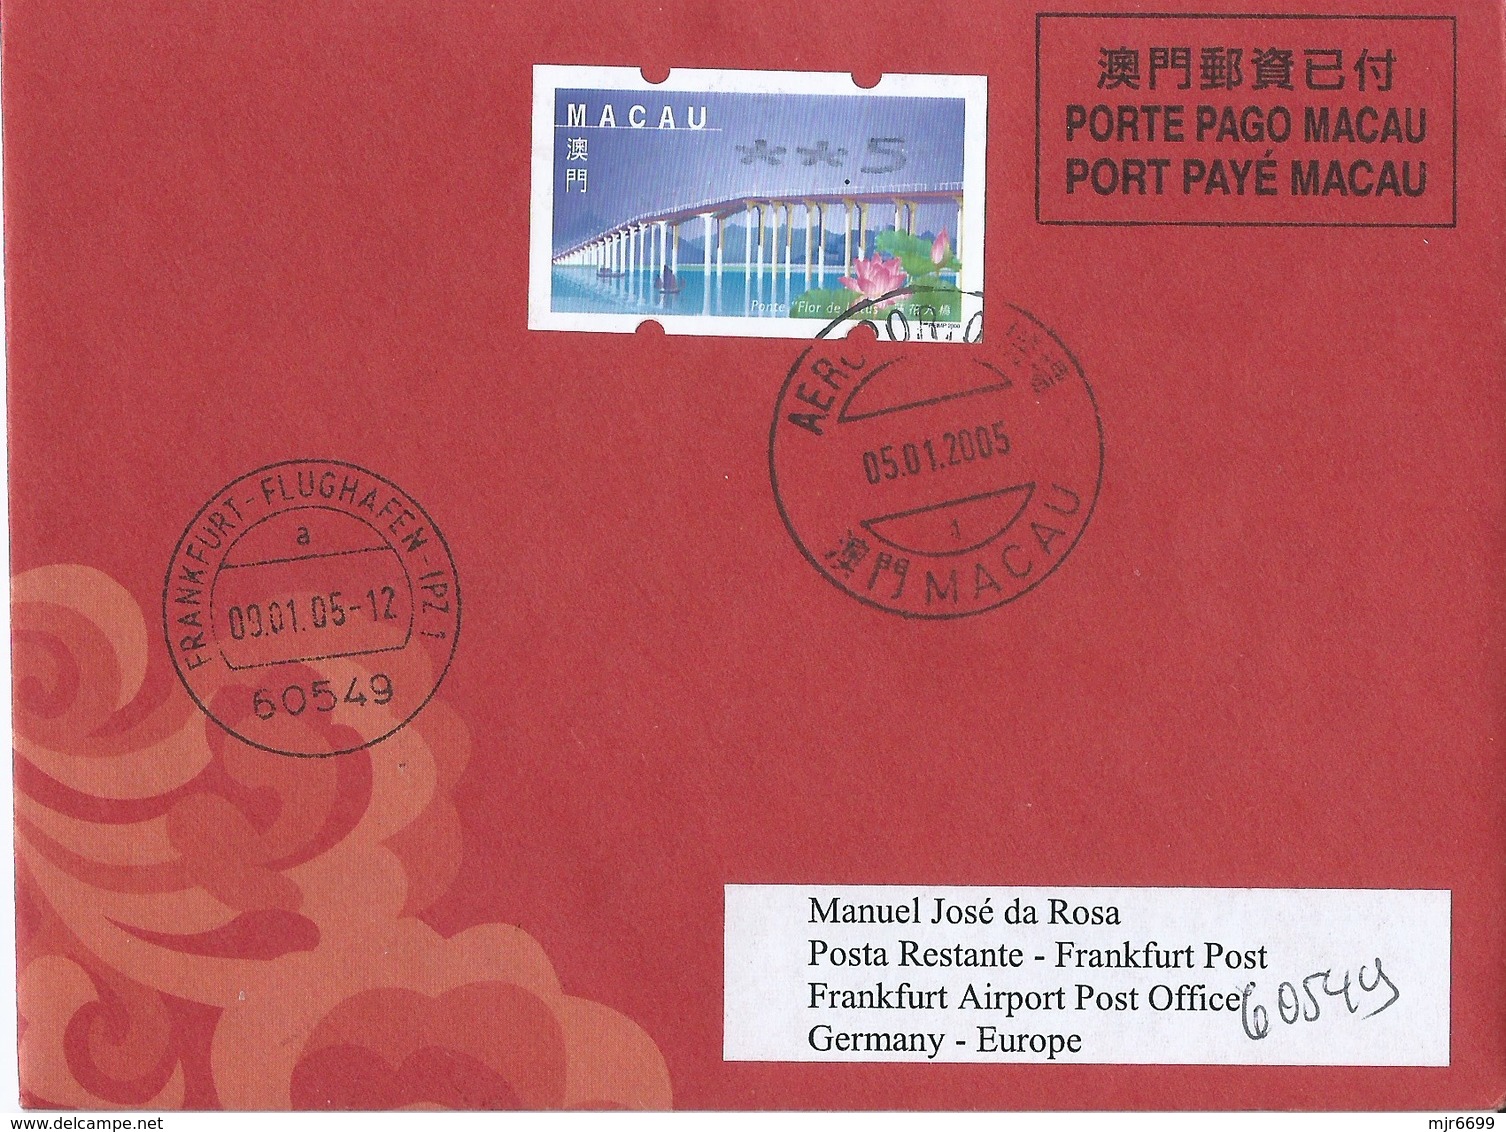 MACAU 2005 LUNAR NEW YEAR OF THE COCK GREETING CARD & POSTAGE PAID COVER 1ST DAY USAGE TO GERMANY - Ganzsachen